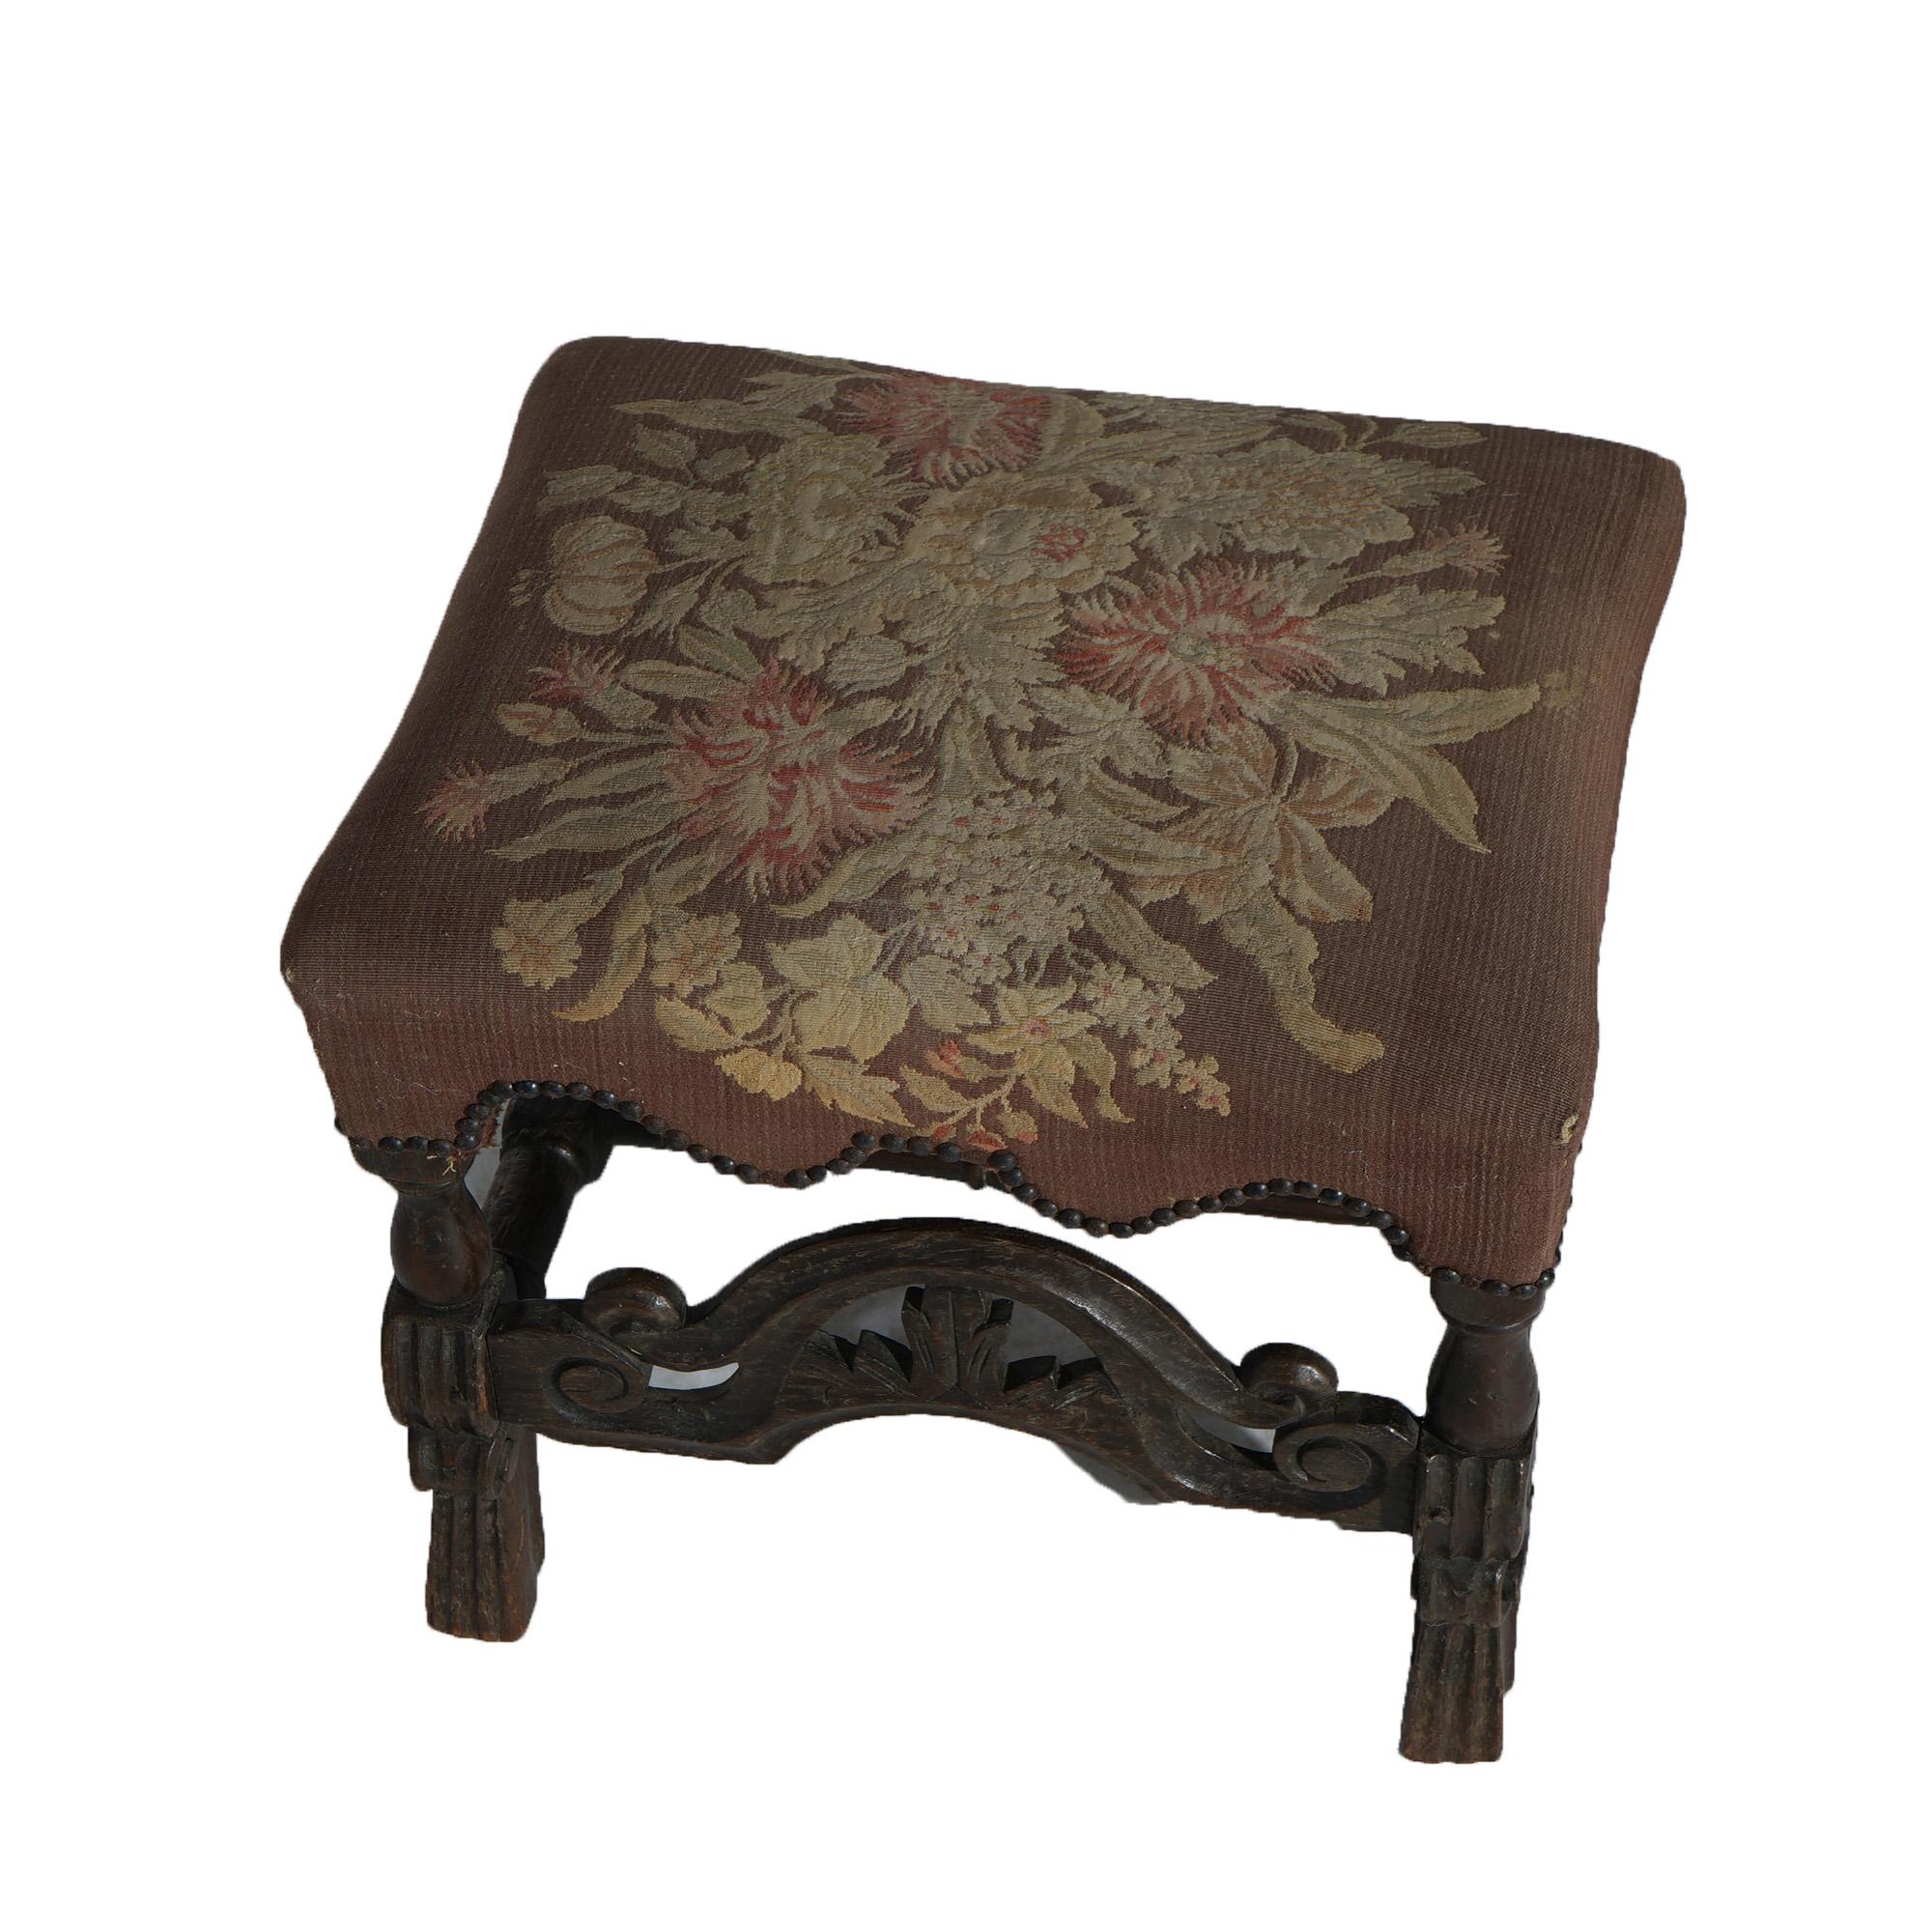 Early Antique English Carved Walnut & Needlepoint Bench (Stool) Circa 1690 For Sale 6